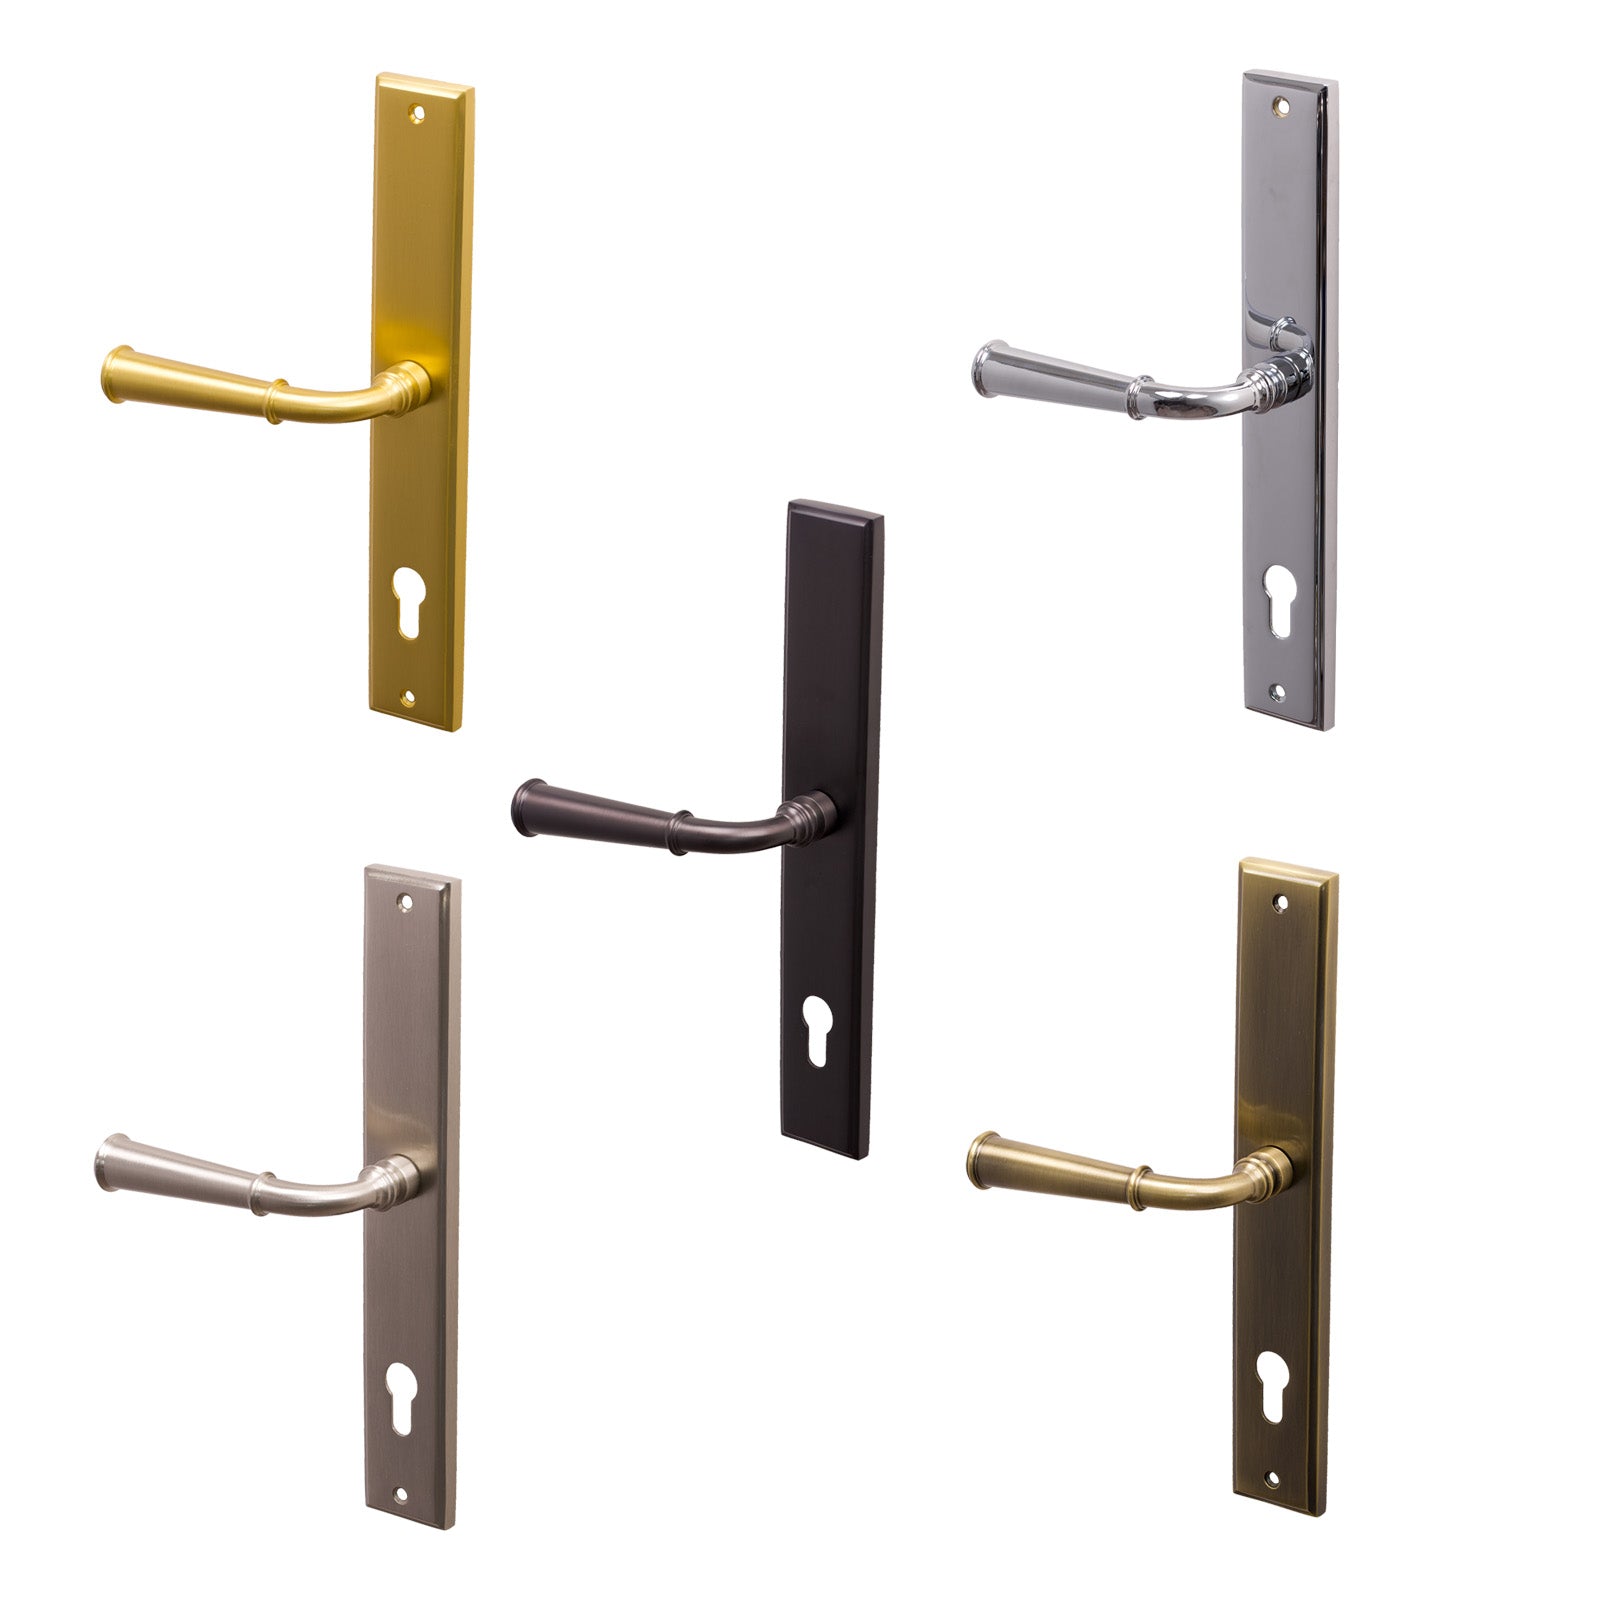 Level Variant Image of Colonial Multipoint Door Handles